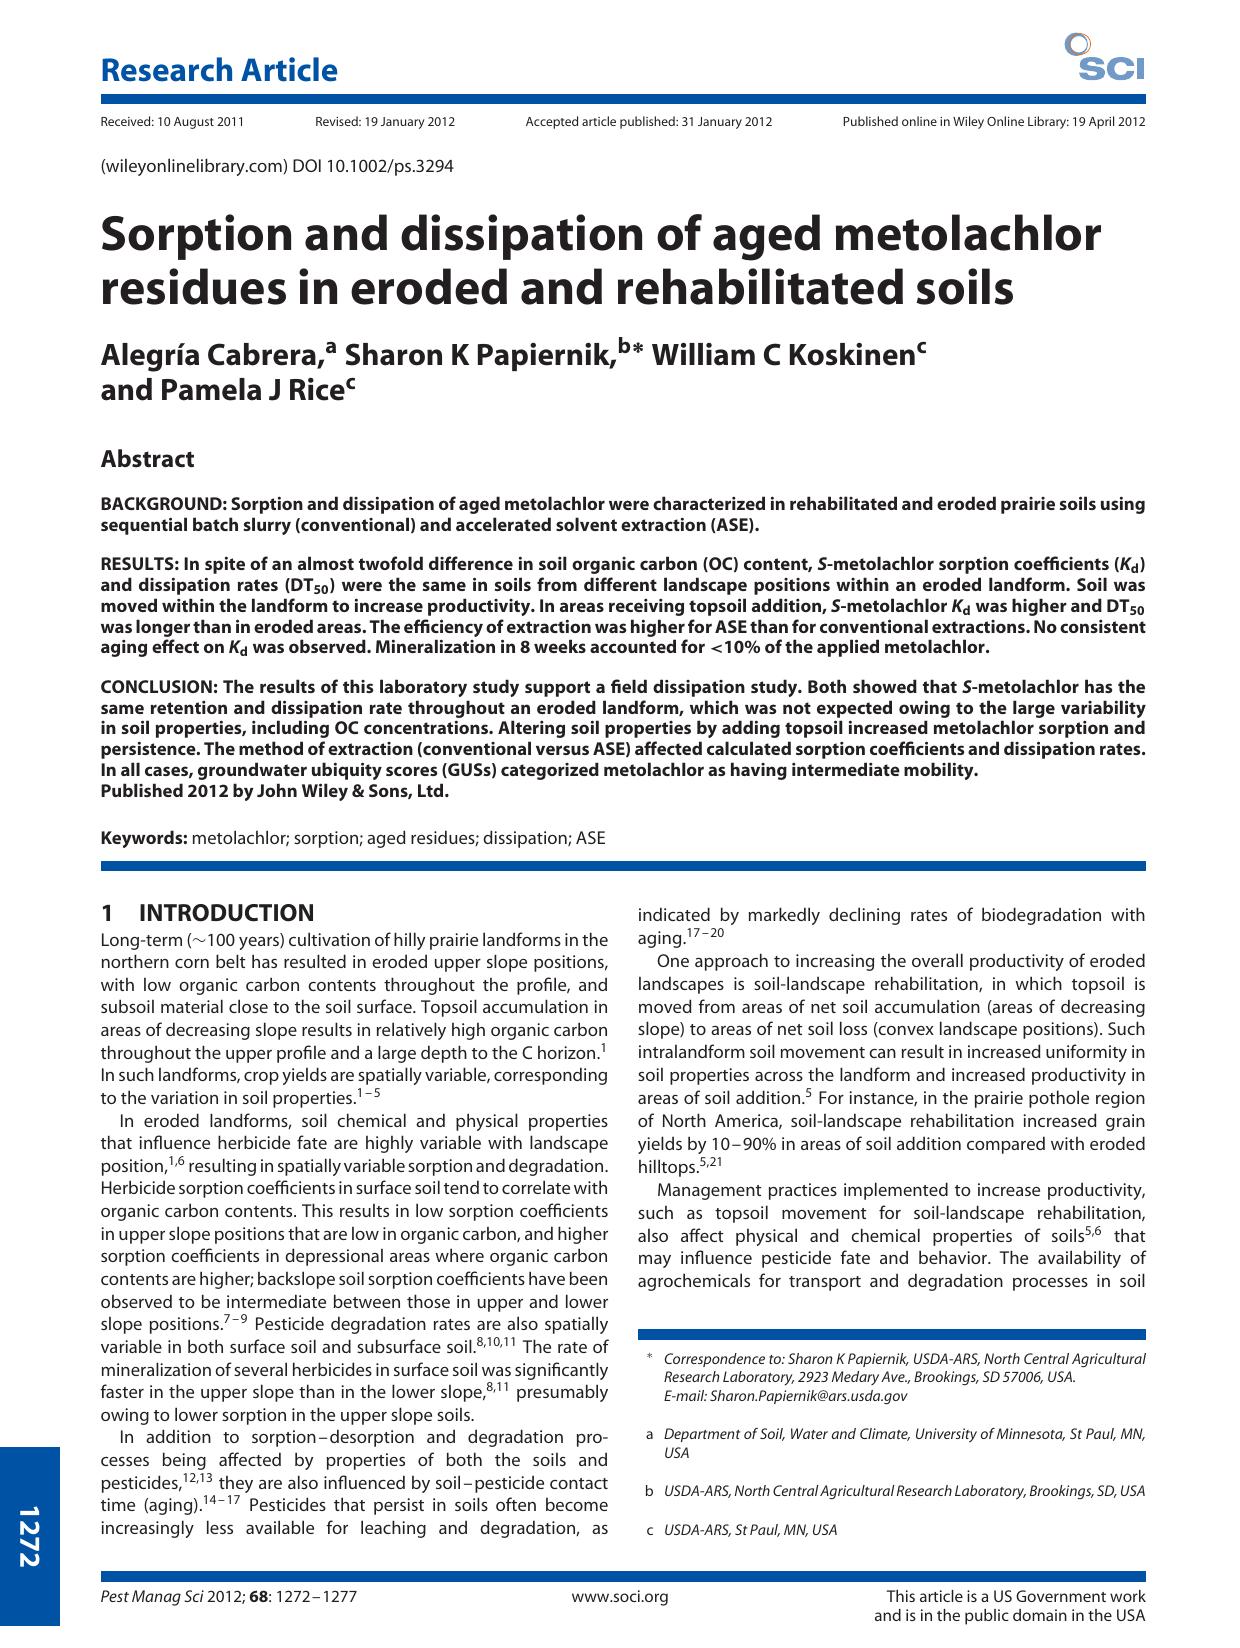 Sorption and dissipation of aged metolachlor residues in eroded and rehabilitated soils by Unknown